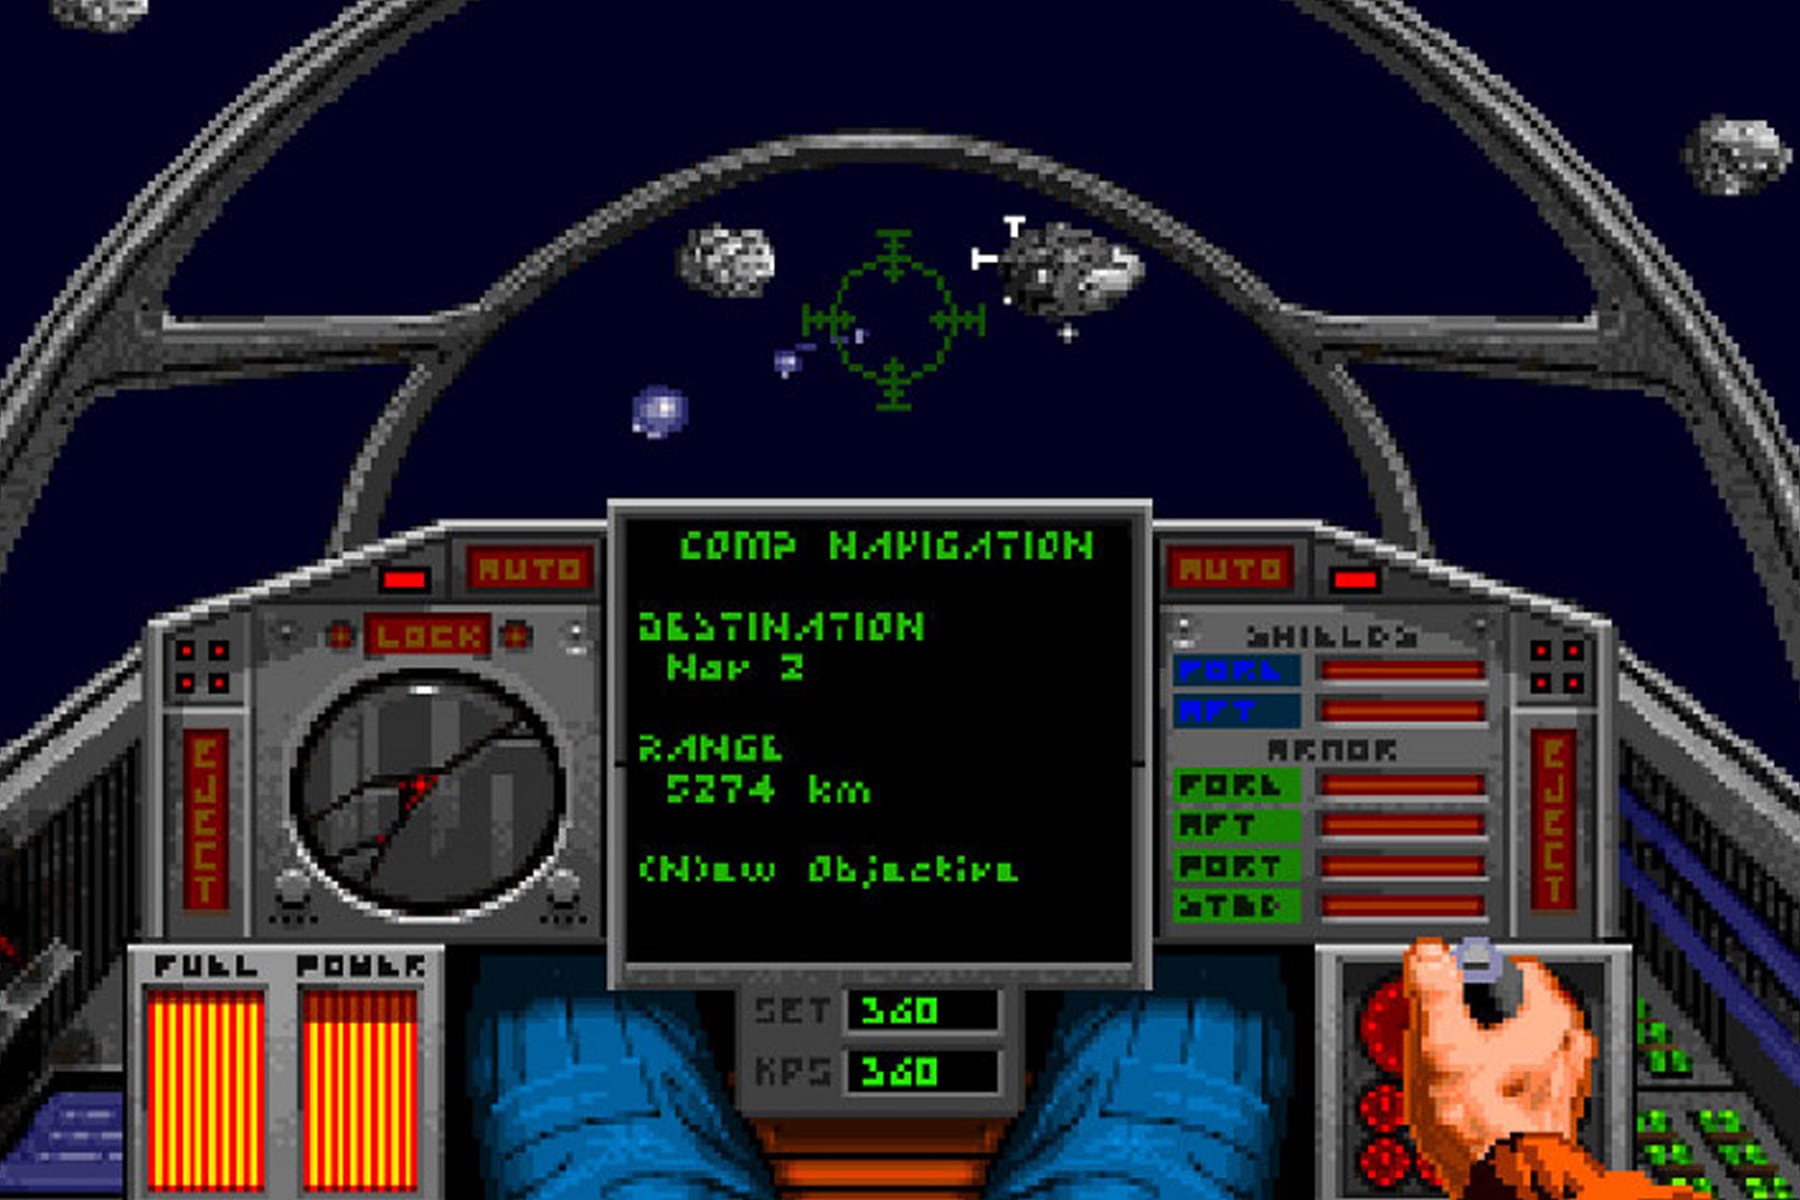 Screenshot of the cockpit in classic pc game Wing Commander 2